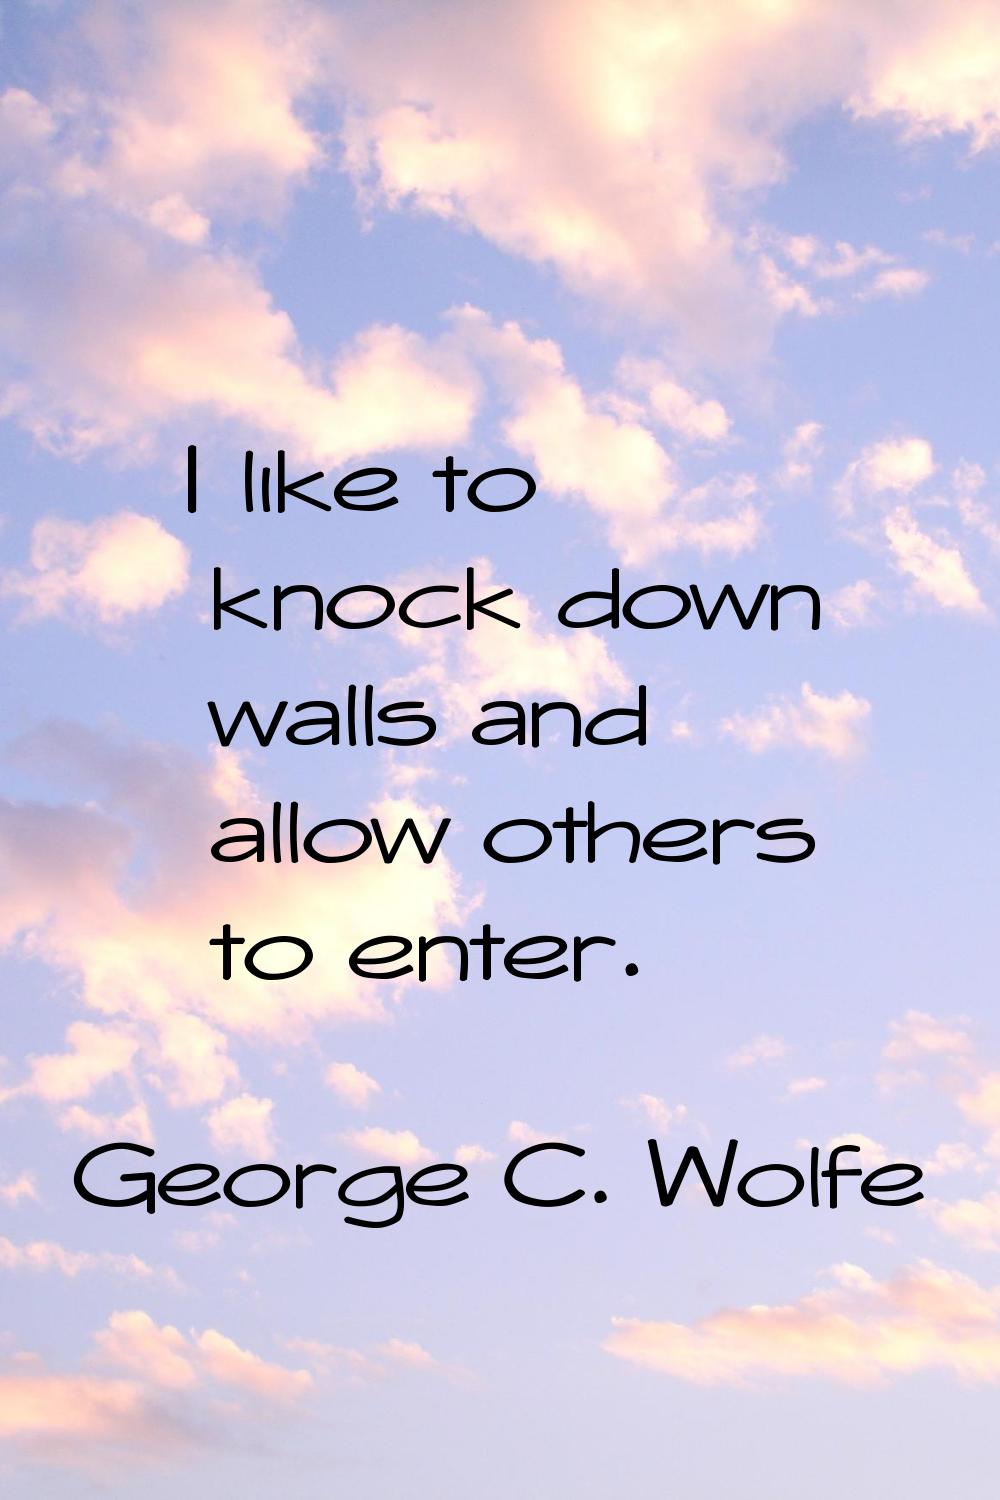 I like to knock down walls and allow others to enter.